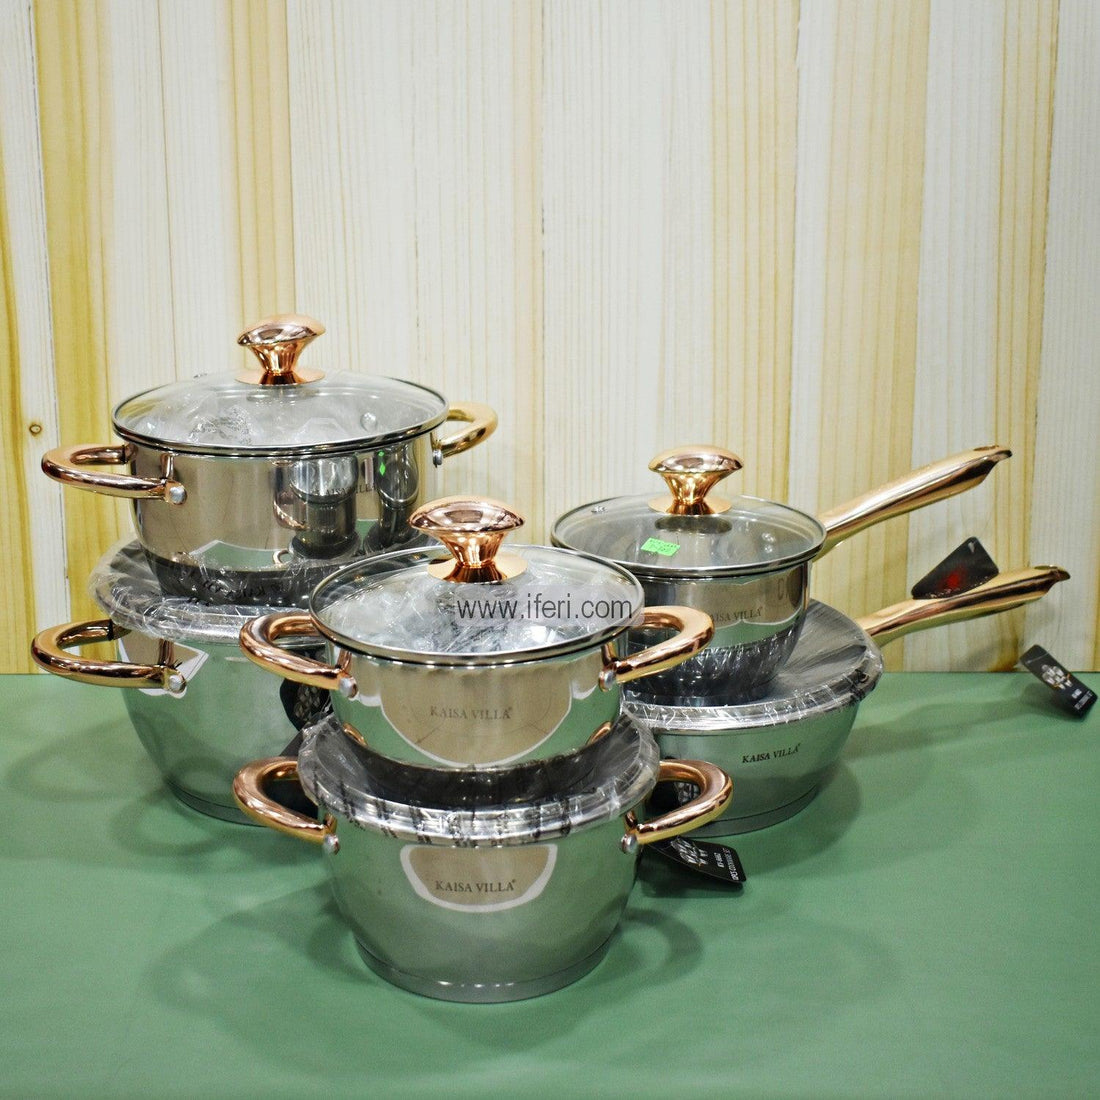 12 Pcs Stainless Steel Cookware Set With Lid KV-6662 Price in Bangladesh - iferi.com